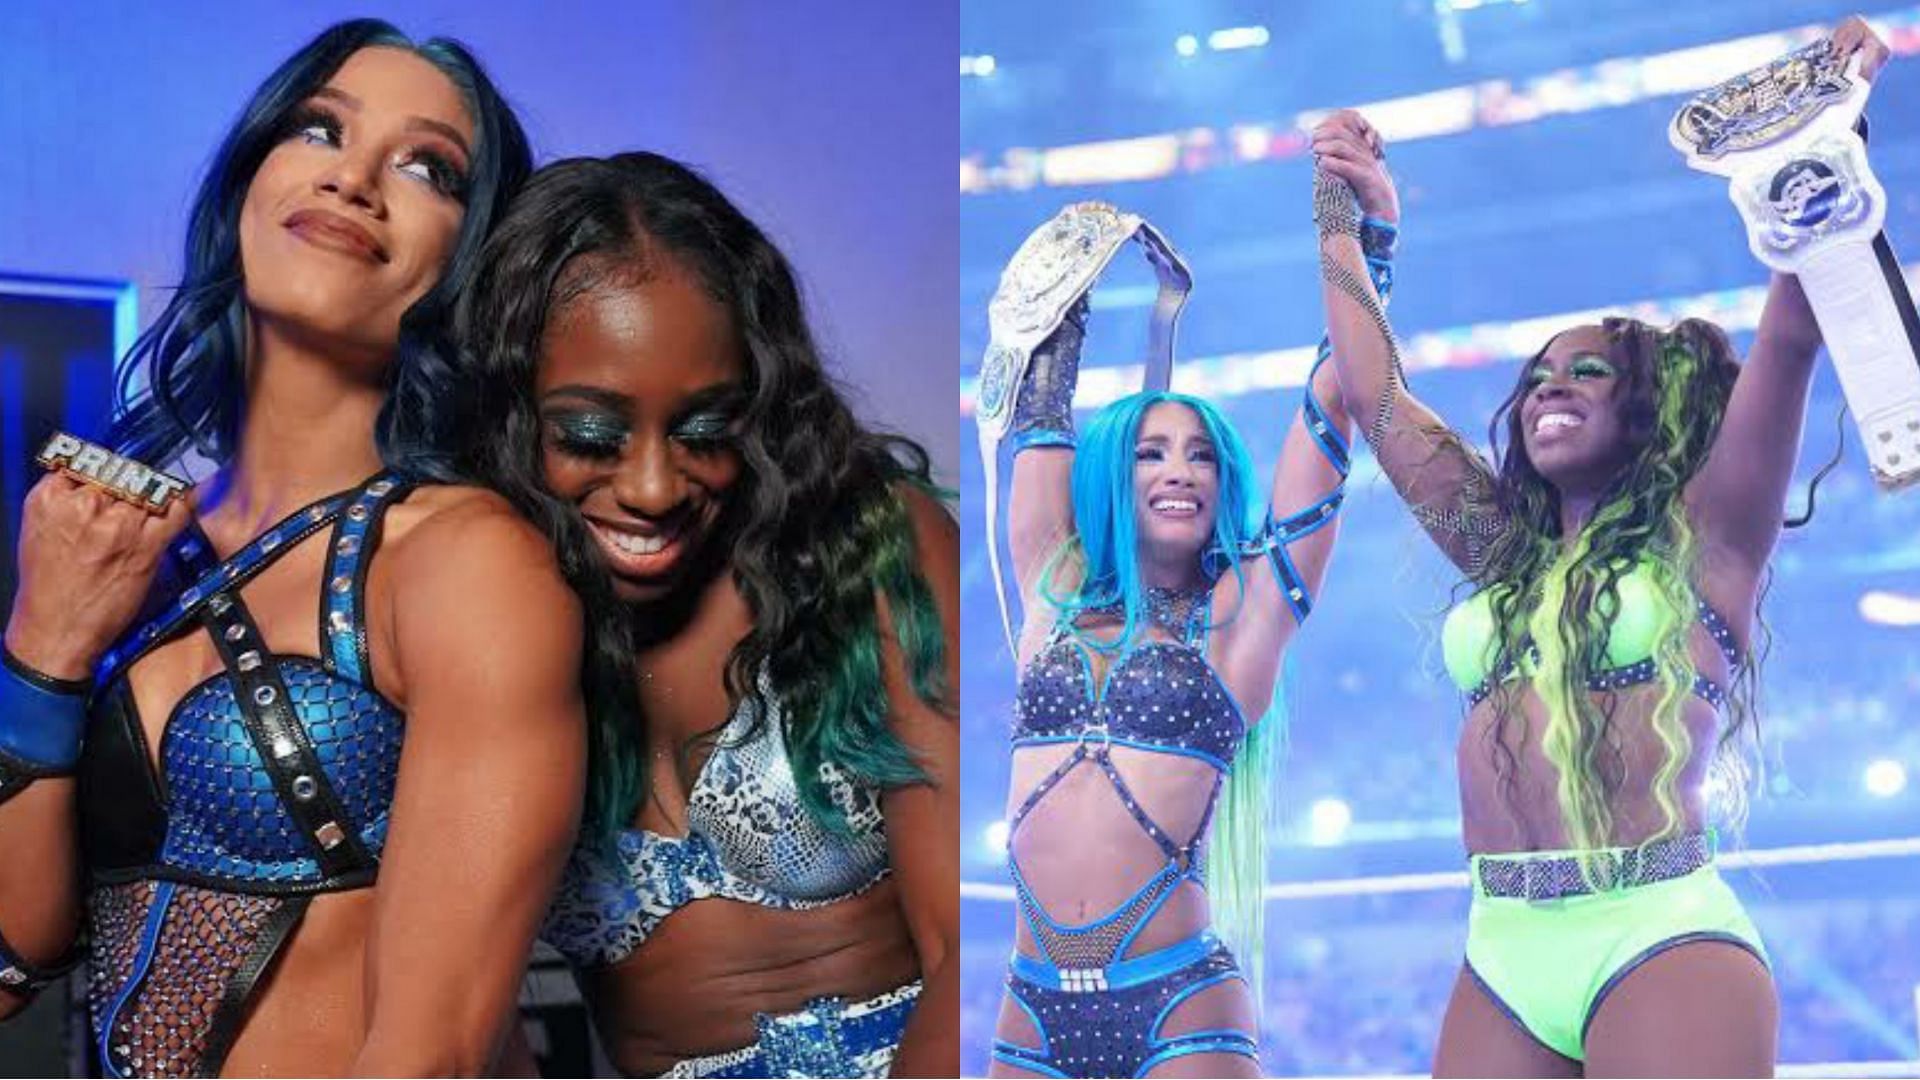 Sasha Banks and Naomi have had a lot of rumors about them recently.